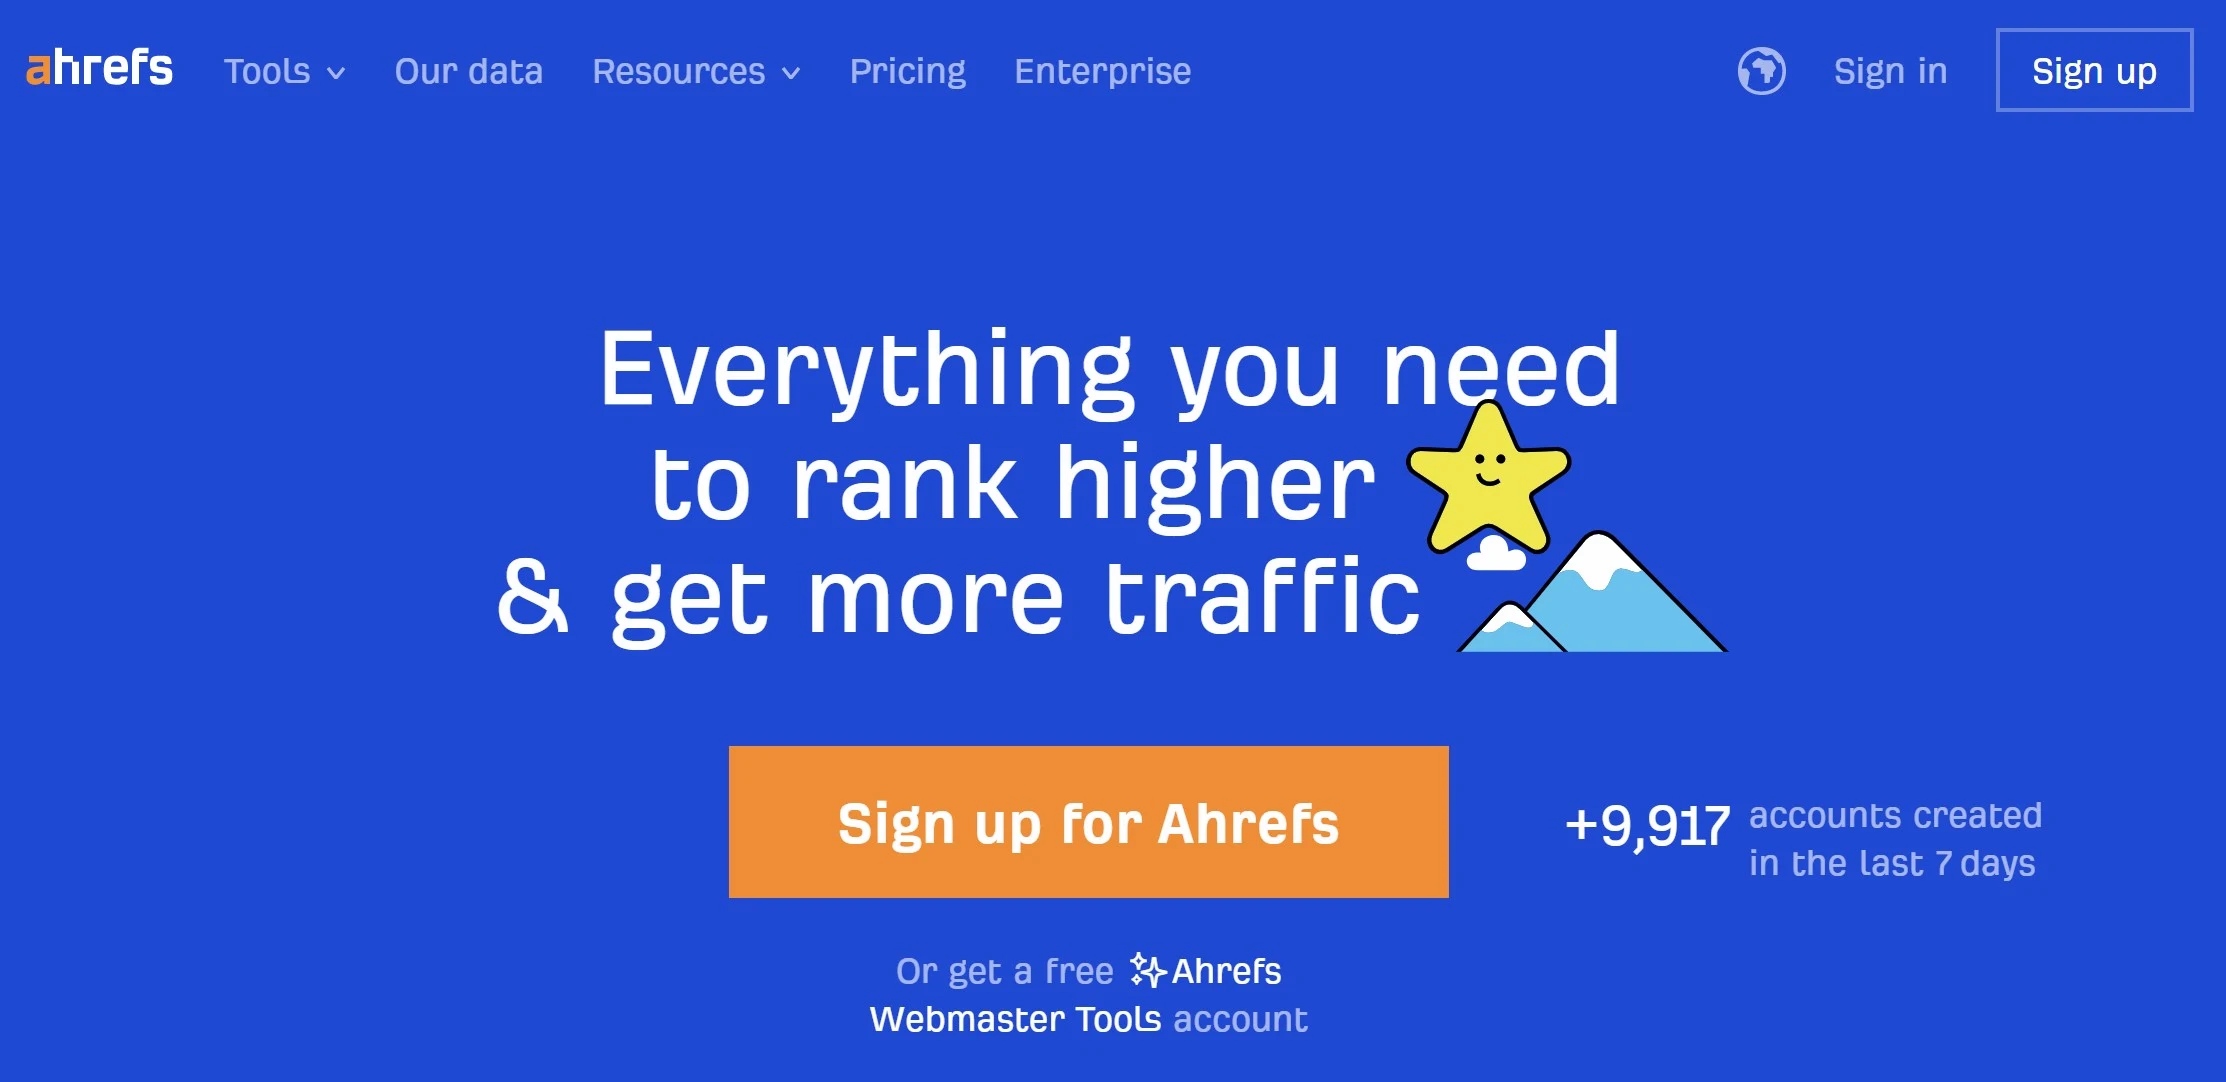 Ahrefs is a very professional keyword checking tool with an extensive database.